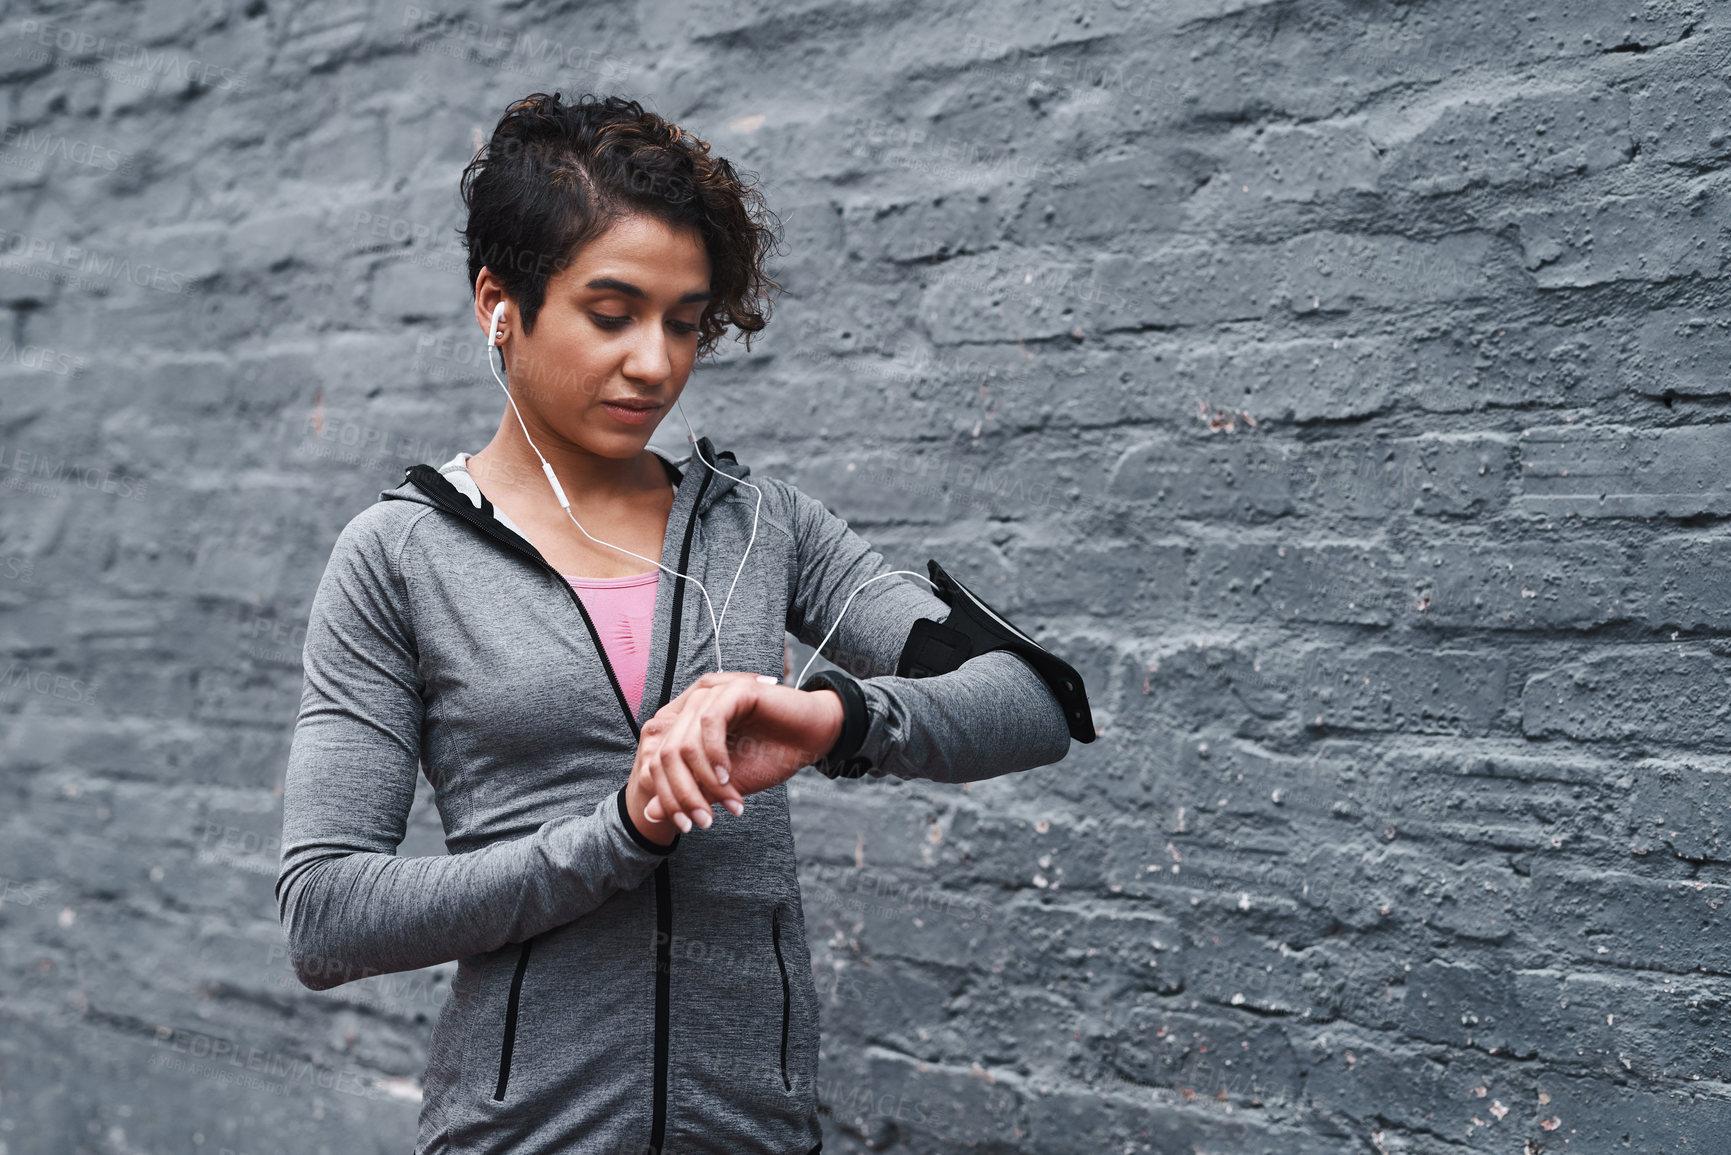 Buy stock photo Cropped shot of an attractive young woman wearing earphones and looking at her fitness tracker while standing outside